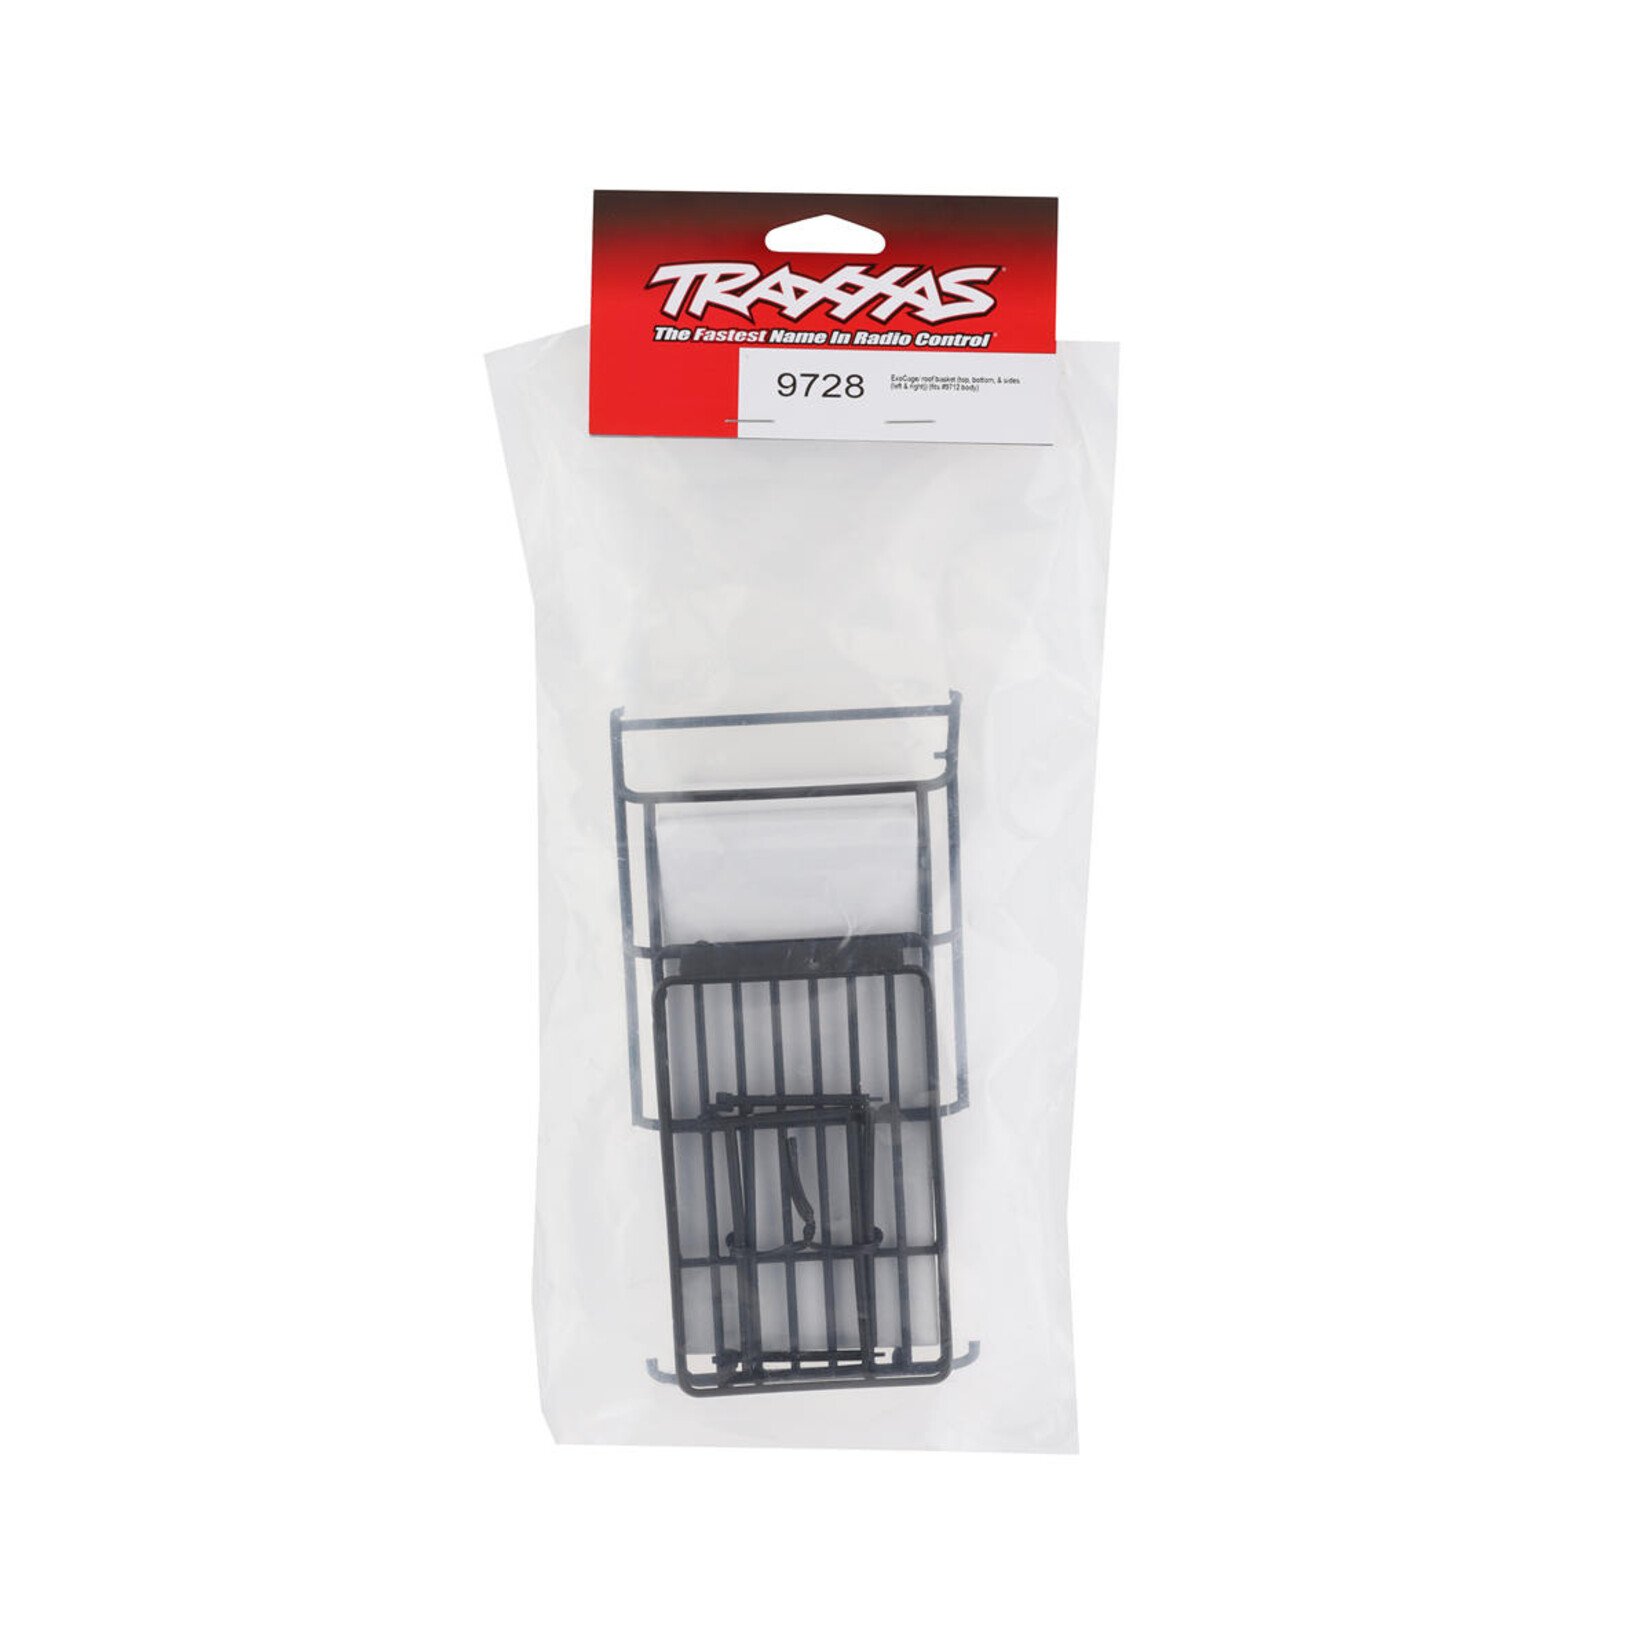 Traxxas Traxxas TRX-4M Land Rover ExoCage & Roof Basket #9728